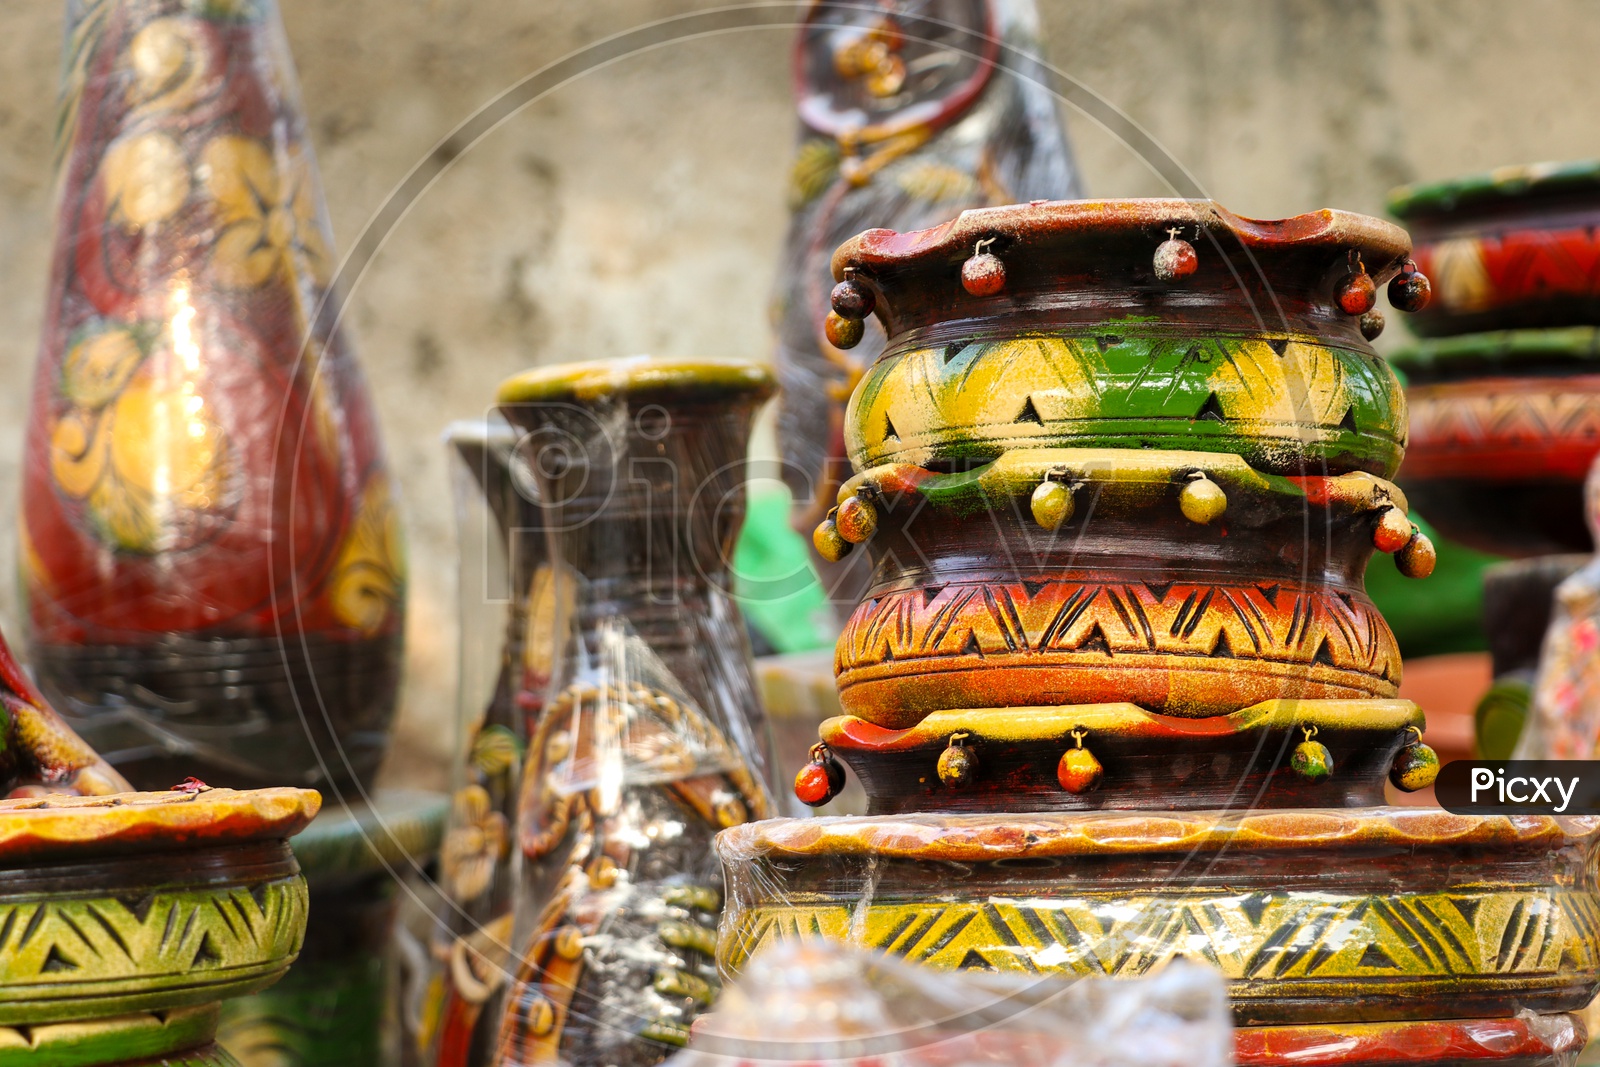 Hand Made Clay Ware or Vases Selling In a Road Side Vendor Stall